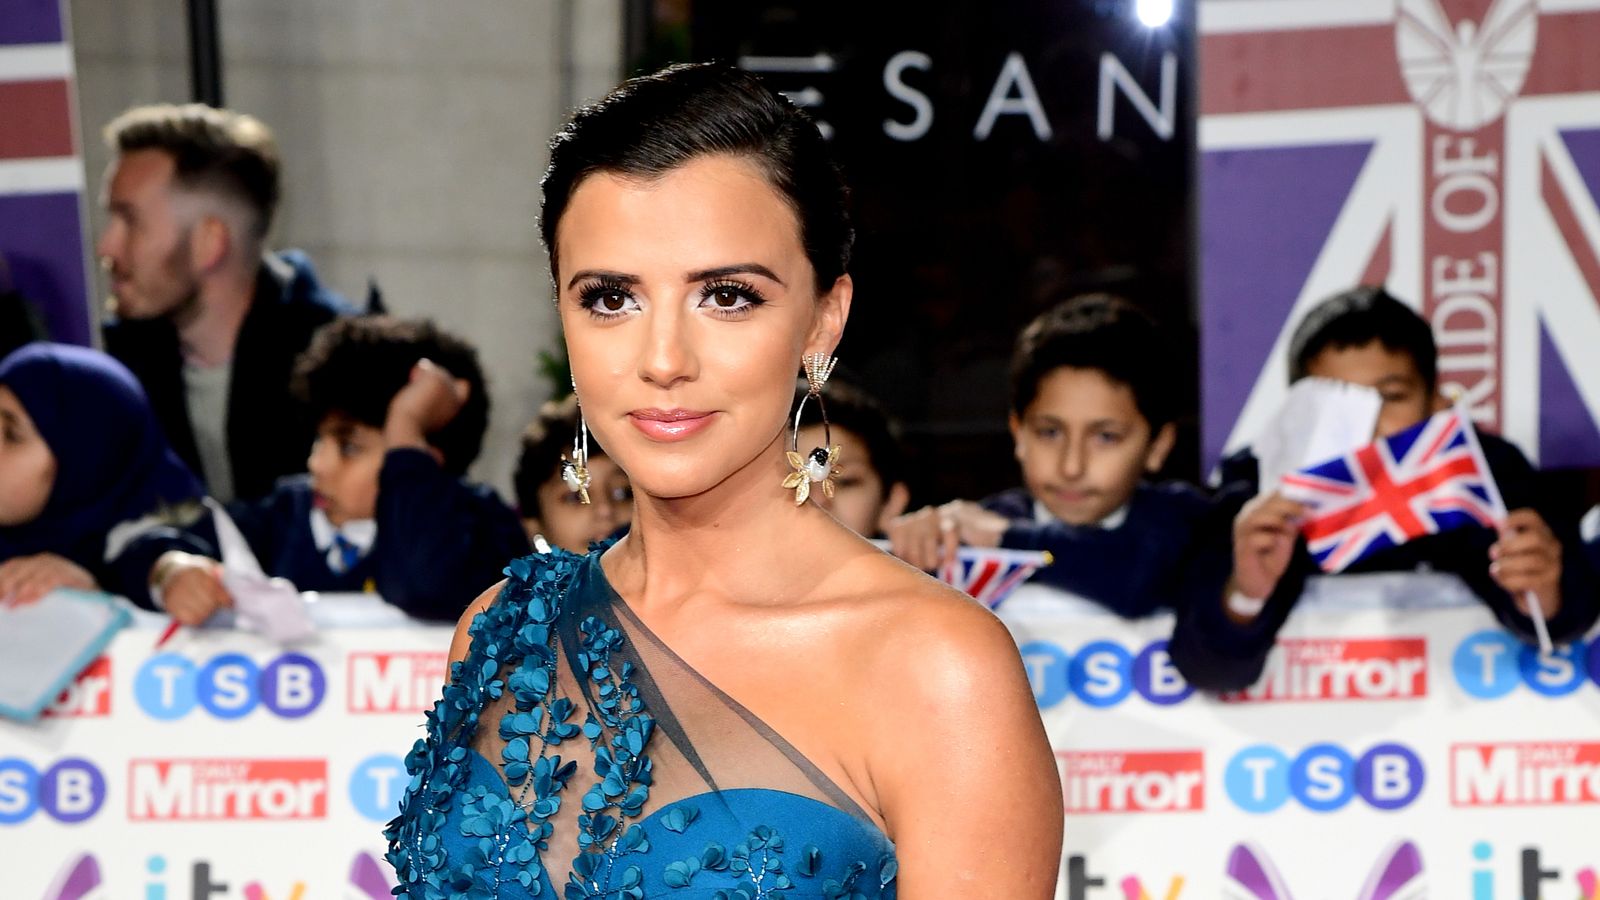 Lucy Mecklenburgh was formerly on The Only Way Is Essex